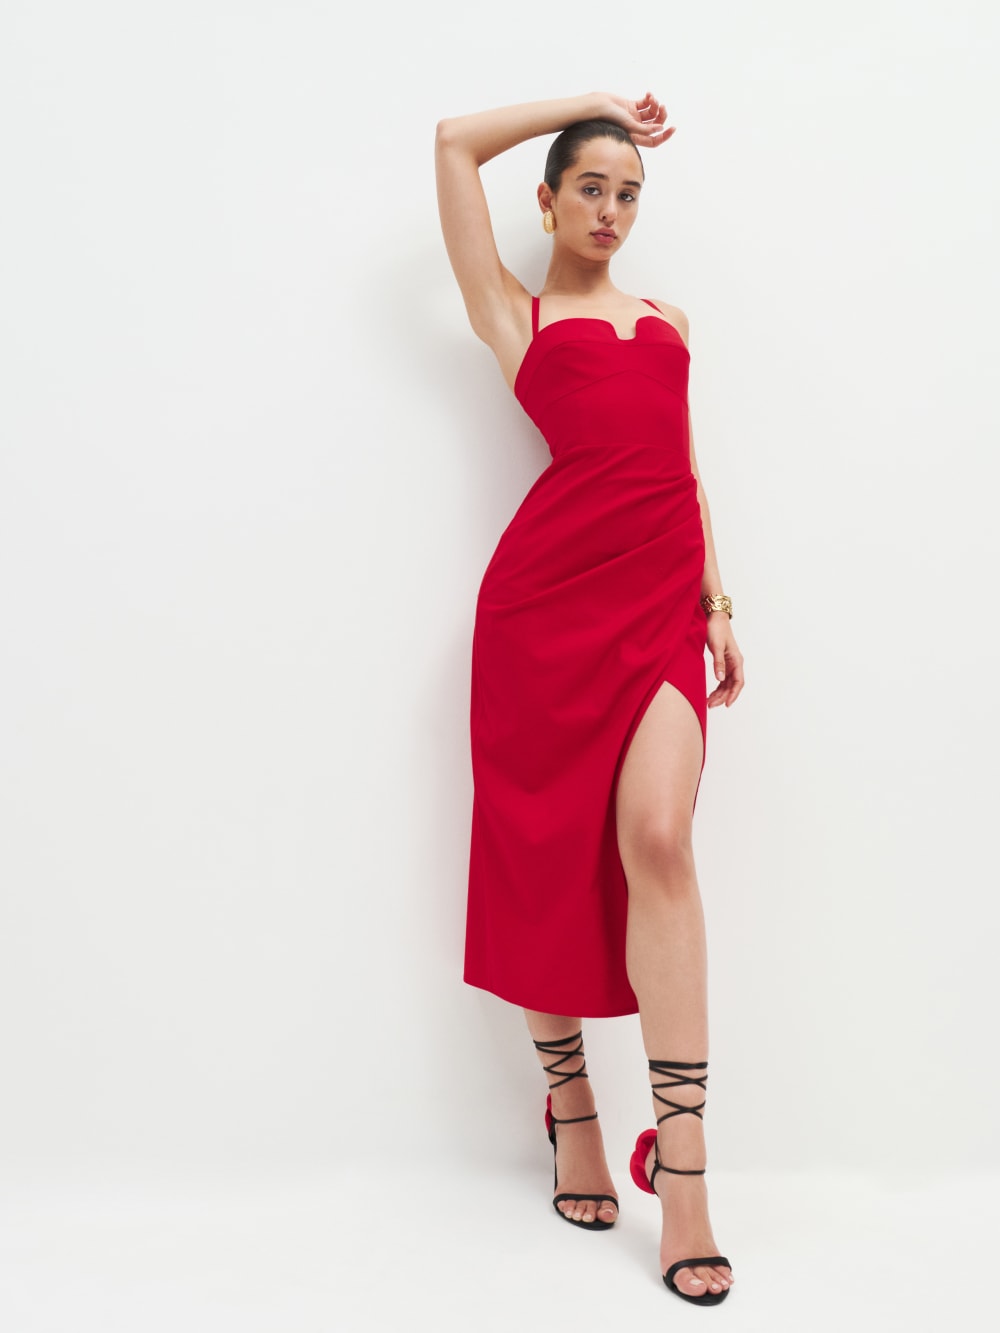 Reformation Alfred red dress in stretch poplin. This midi dress has back smocking, adjustable straps, a sweetheart neckline, and a sexy side slit. It fastens with a back zipper.